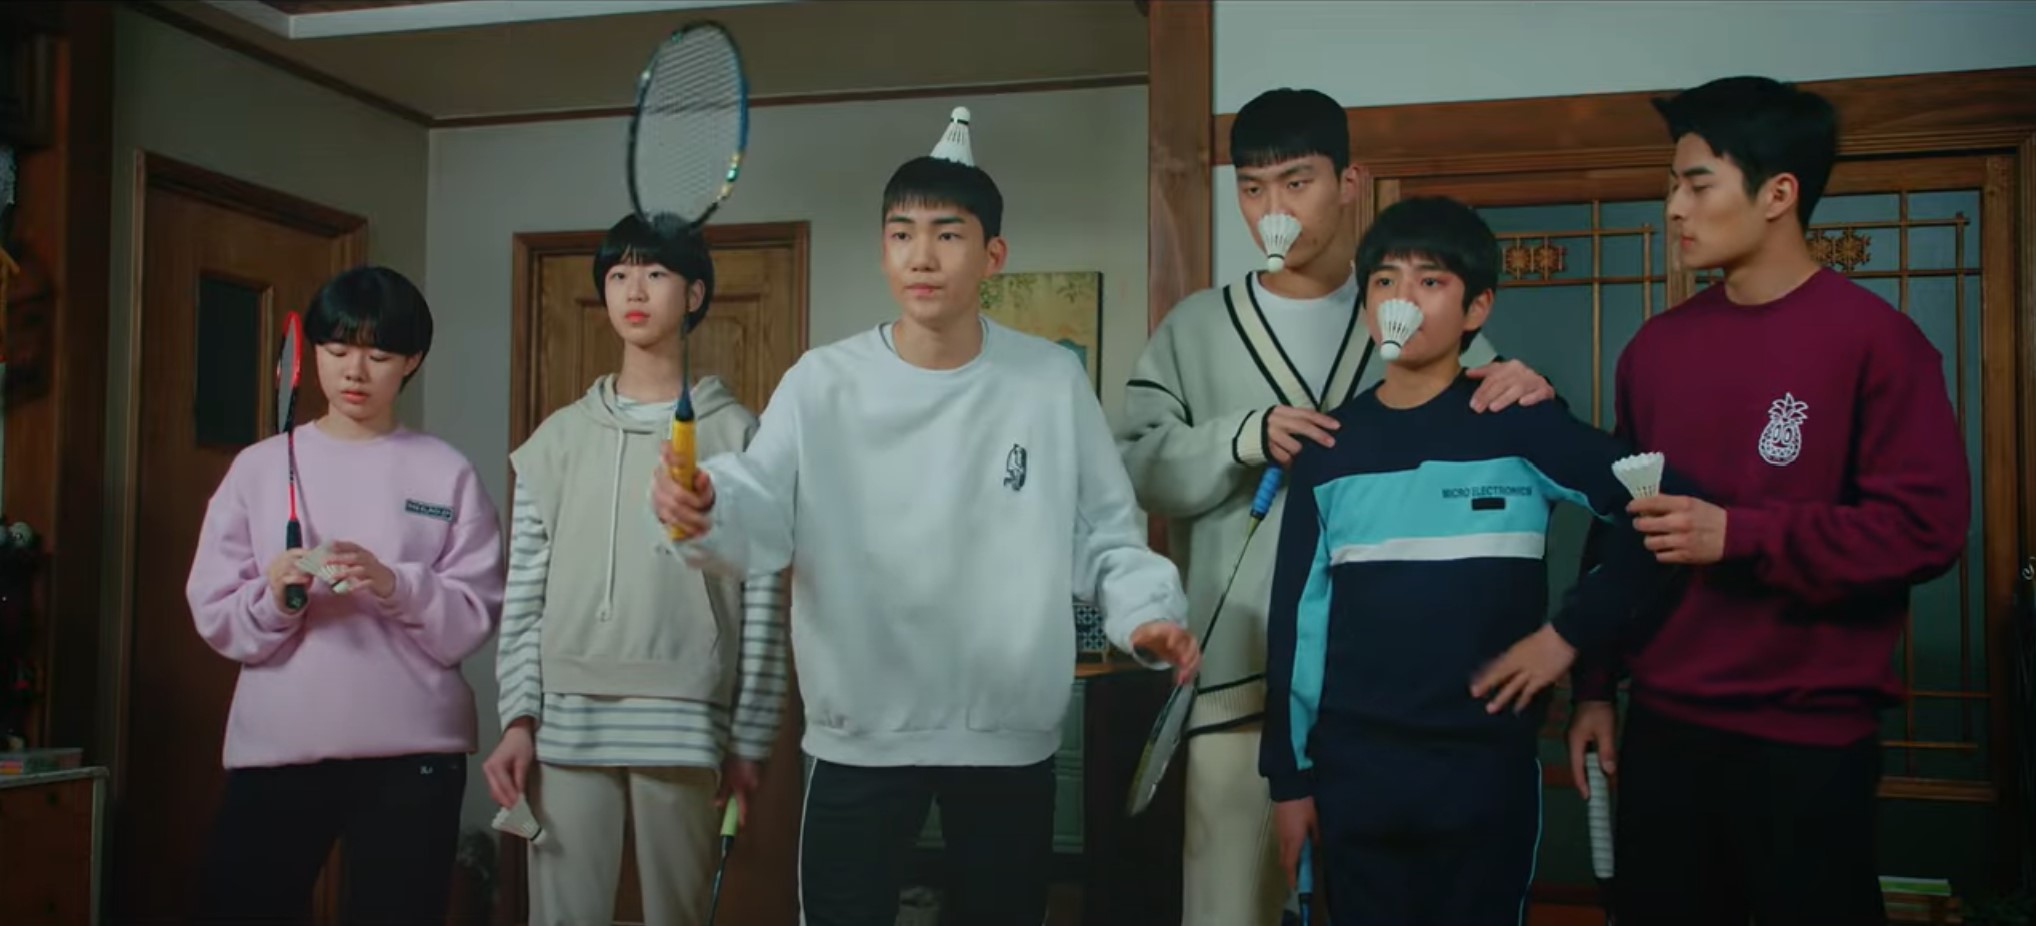 Kim Sang-kyung becomes coach for the Racket Boys in new stills and teaser